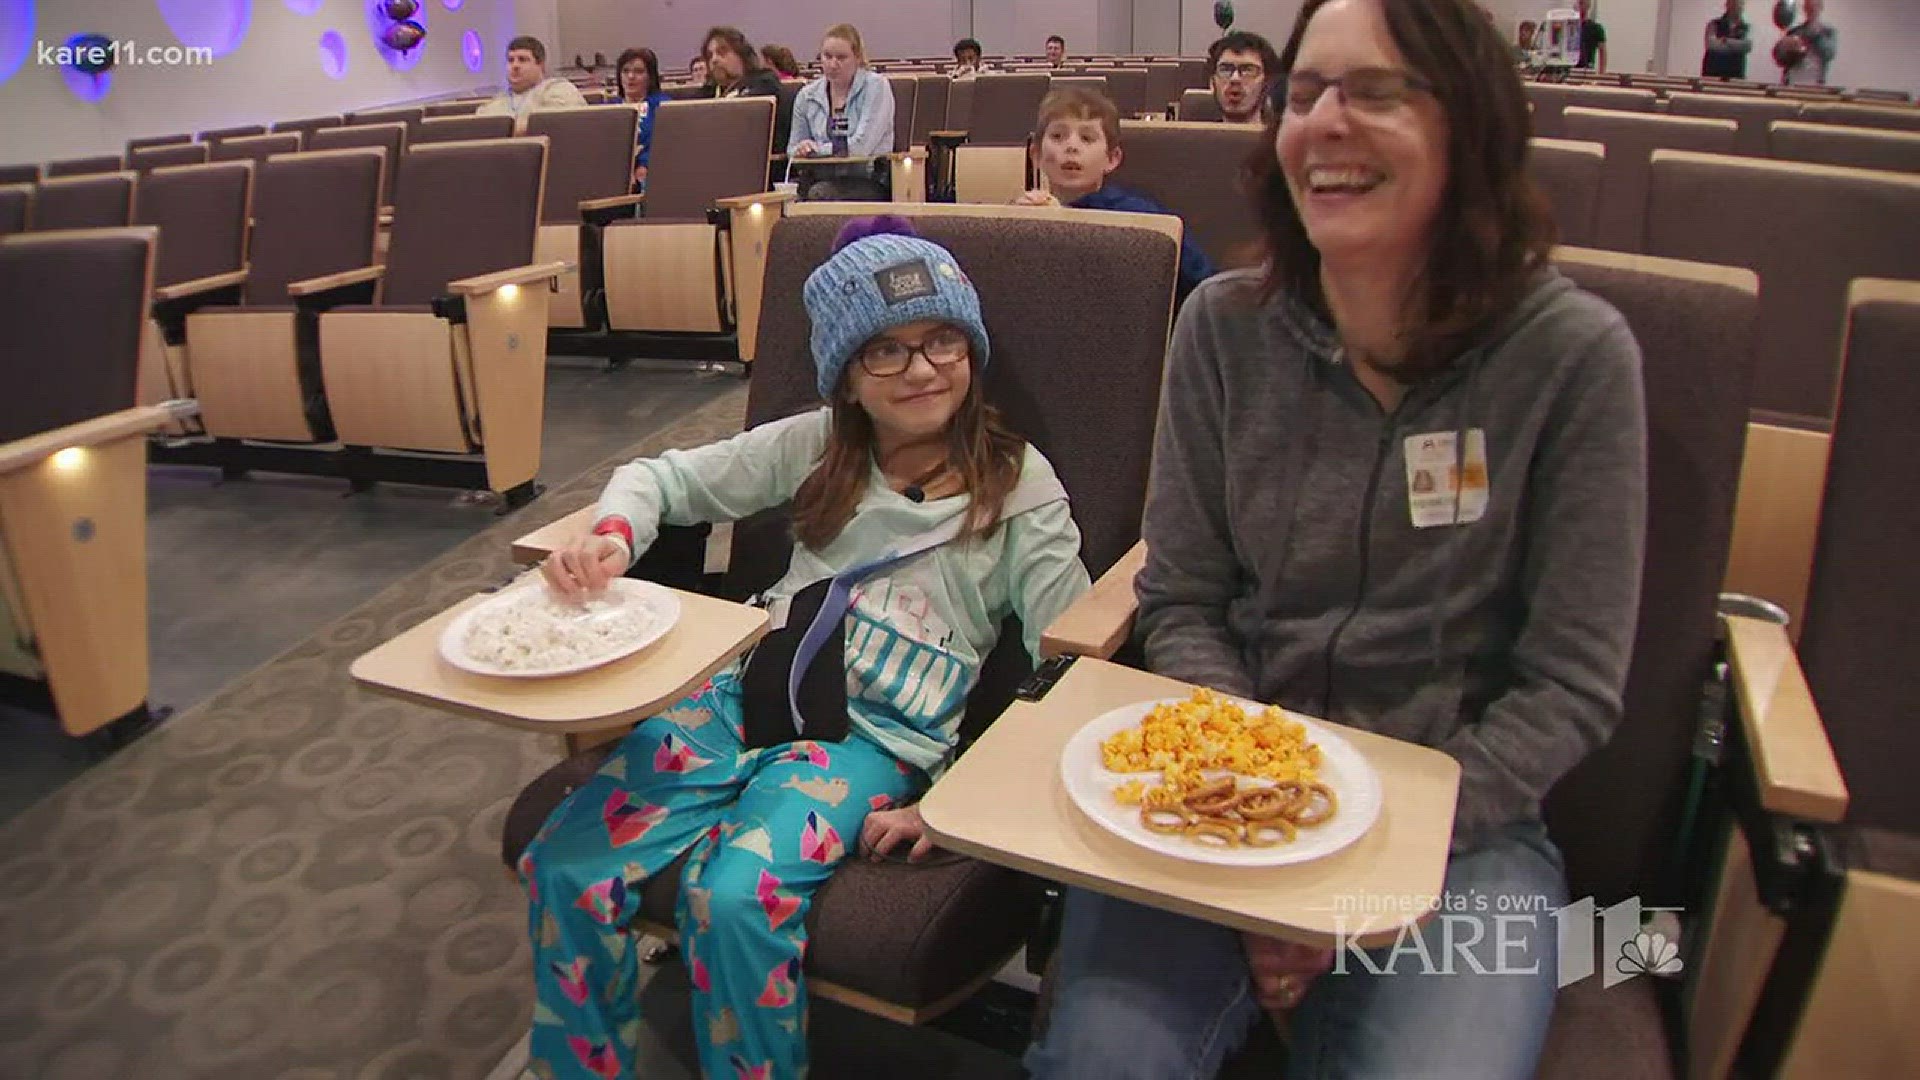 At the University of Minnesota Masonic Children's Hospital, the kids had a very special watch party on Super Bowl Sunday.